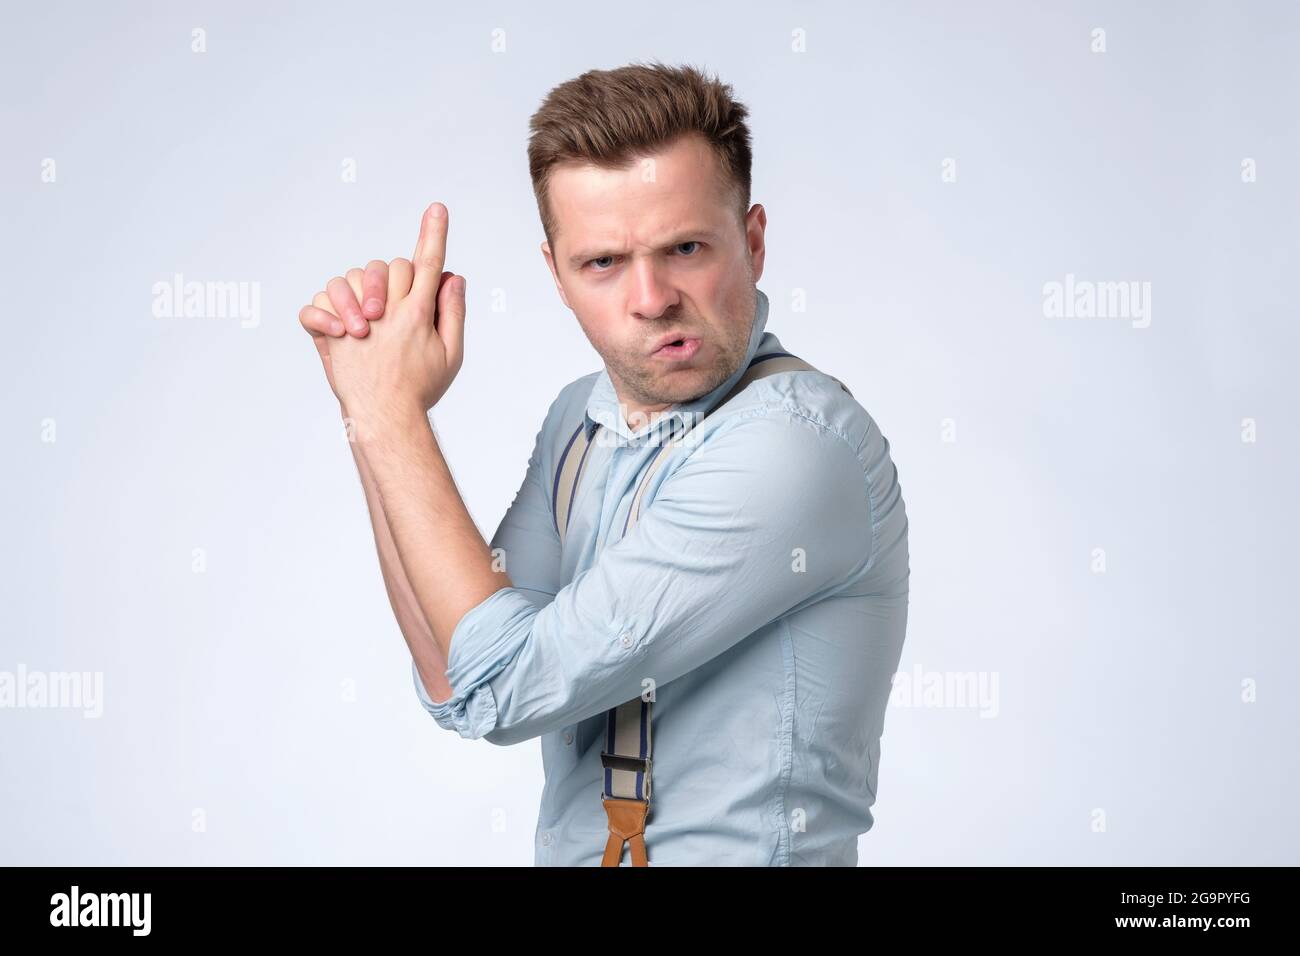 Caucasian young man shouting with gun hand gesture. Stock Photo